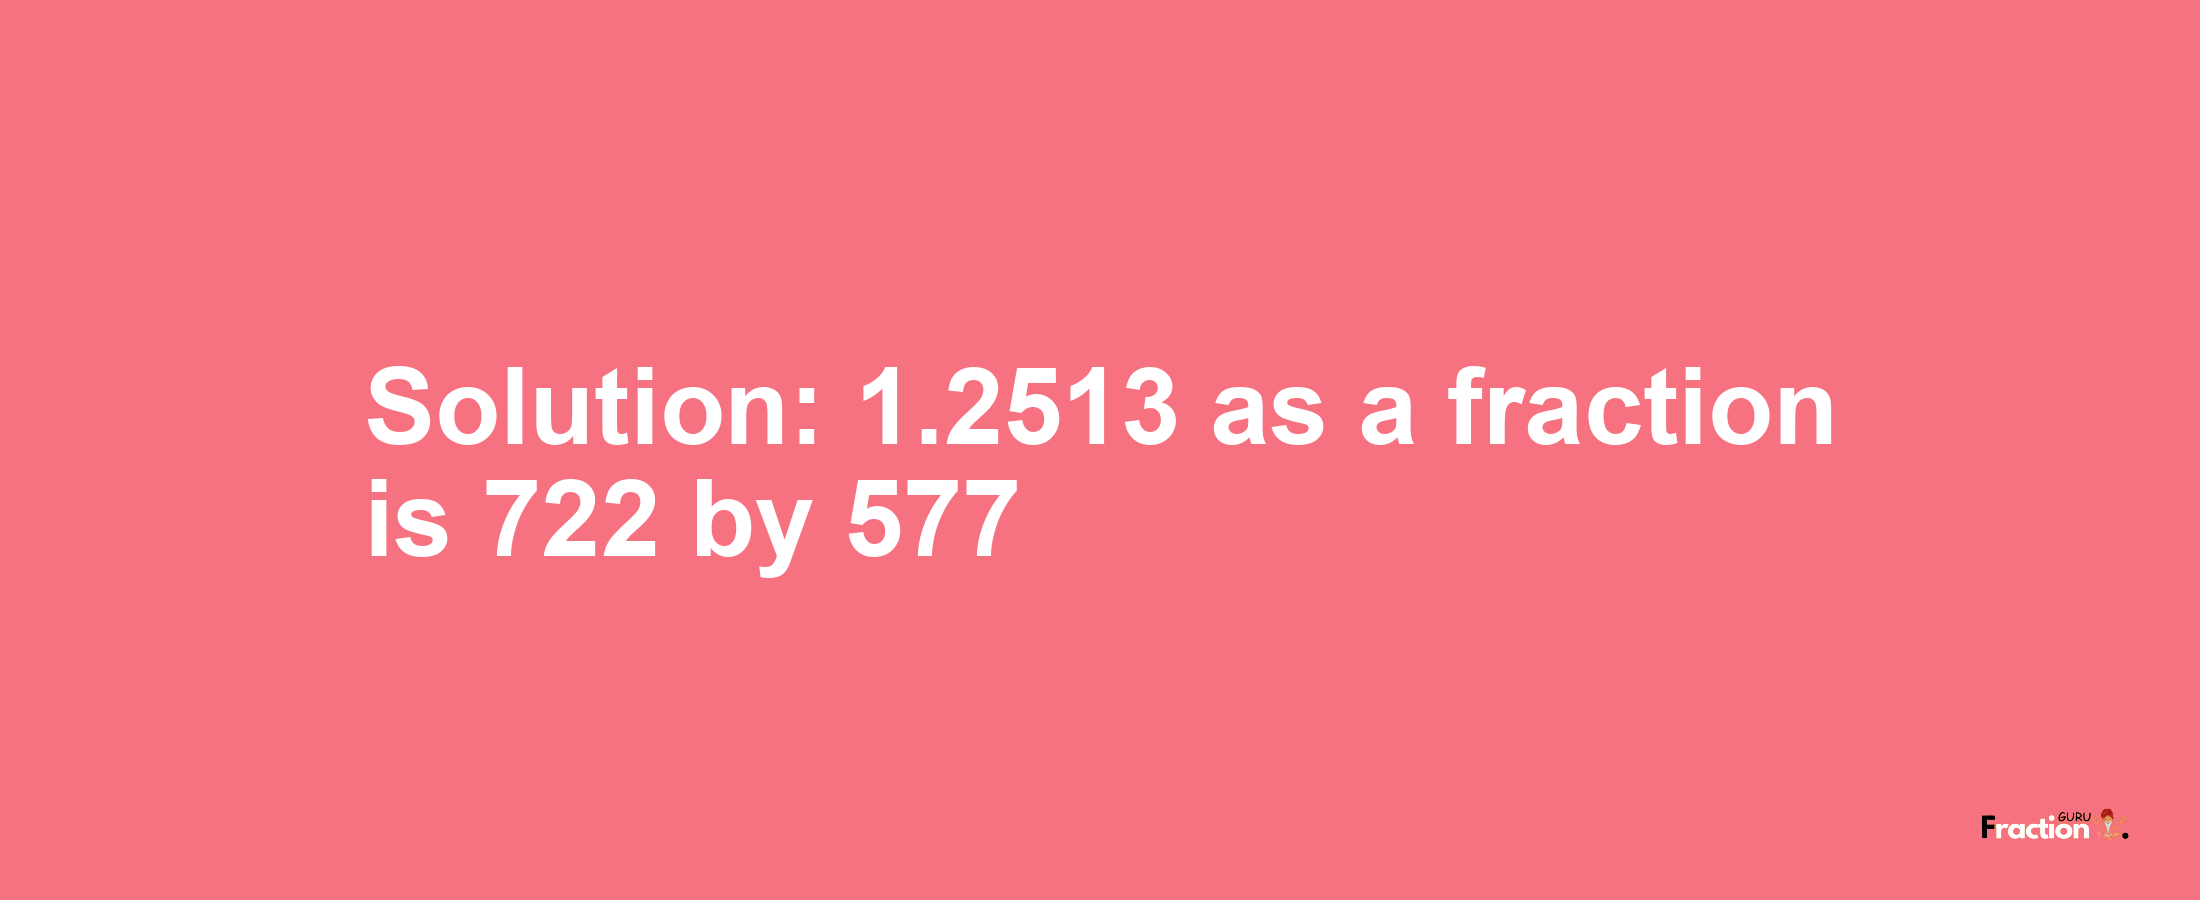 Solution:1.2513 as a fraction is 722/577